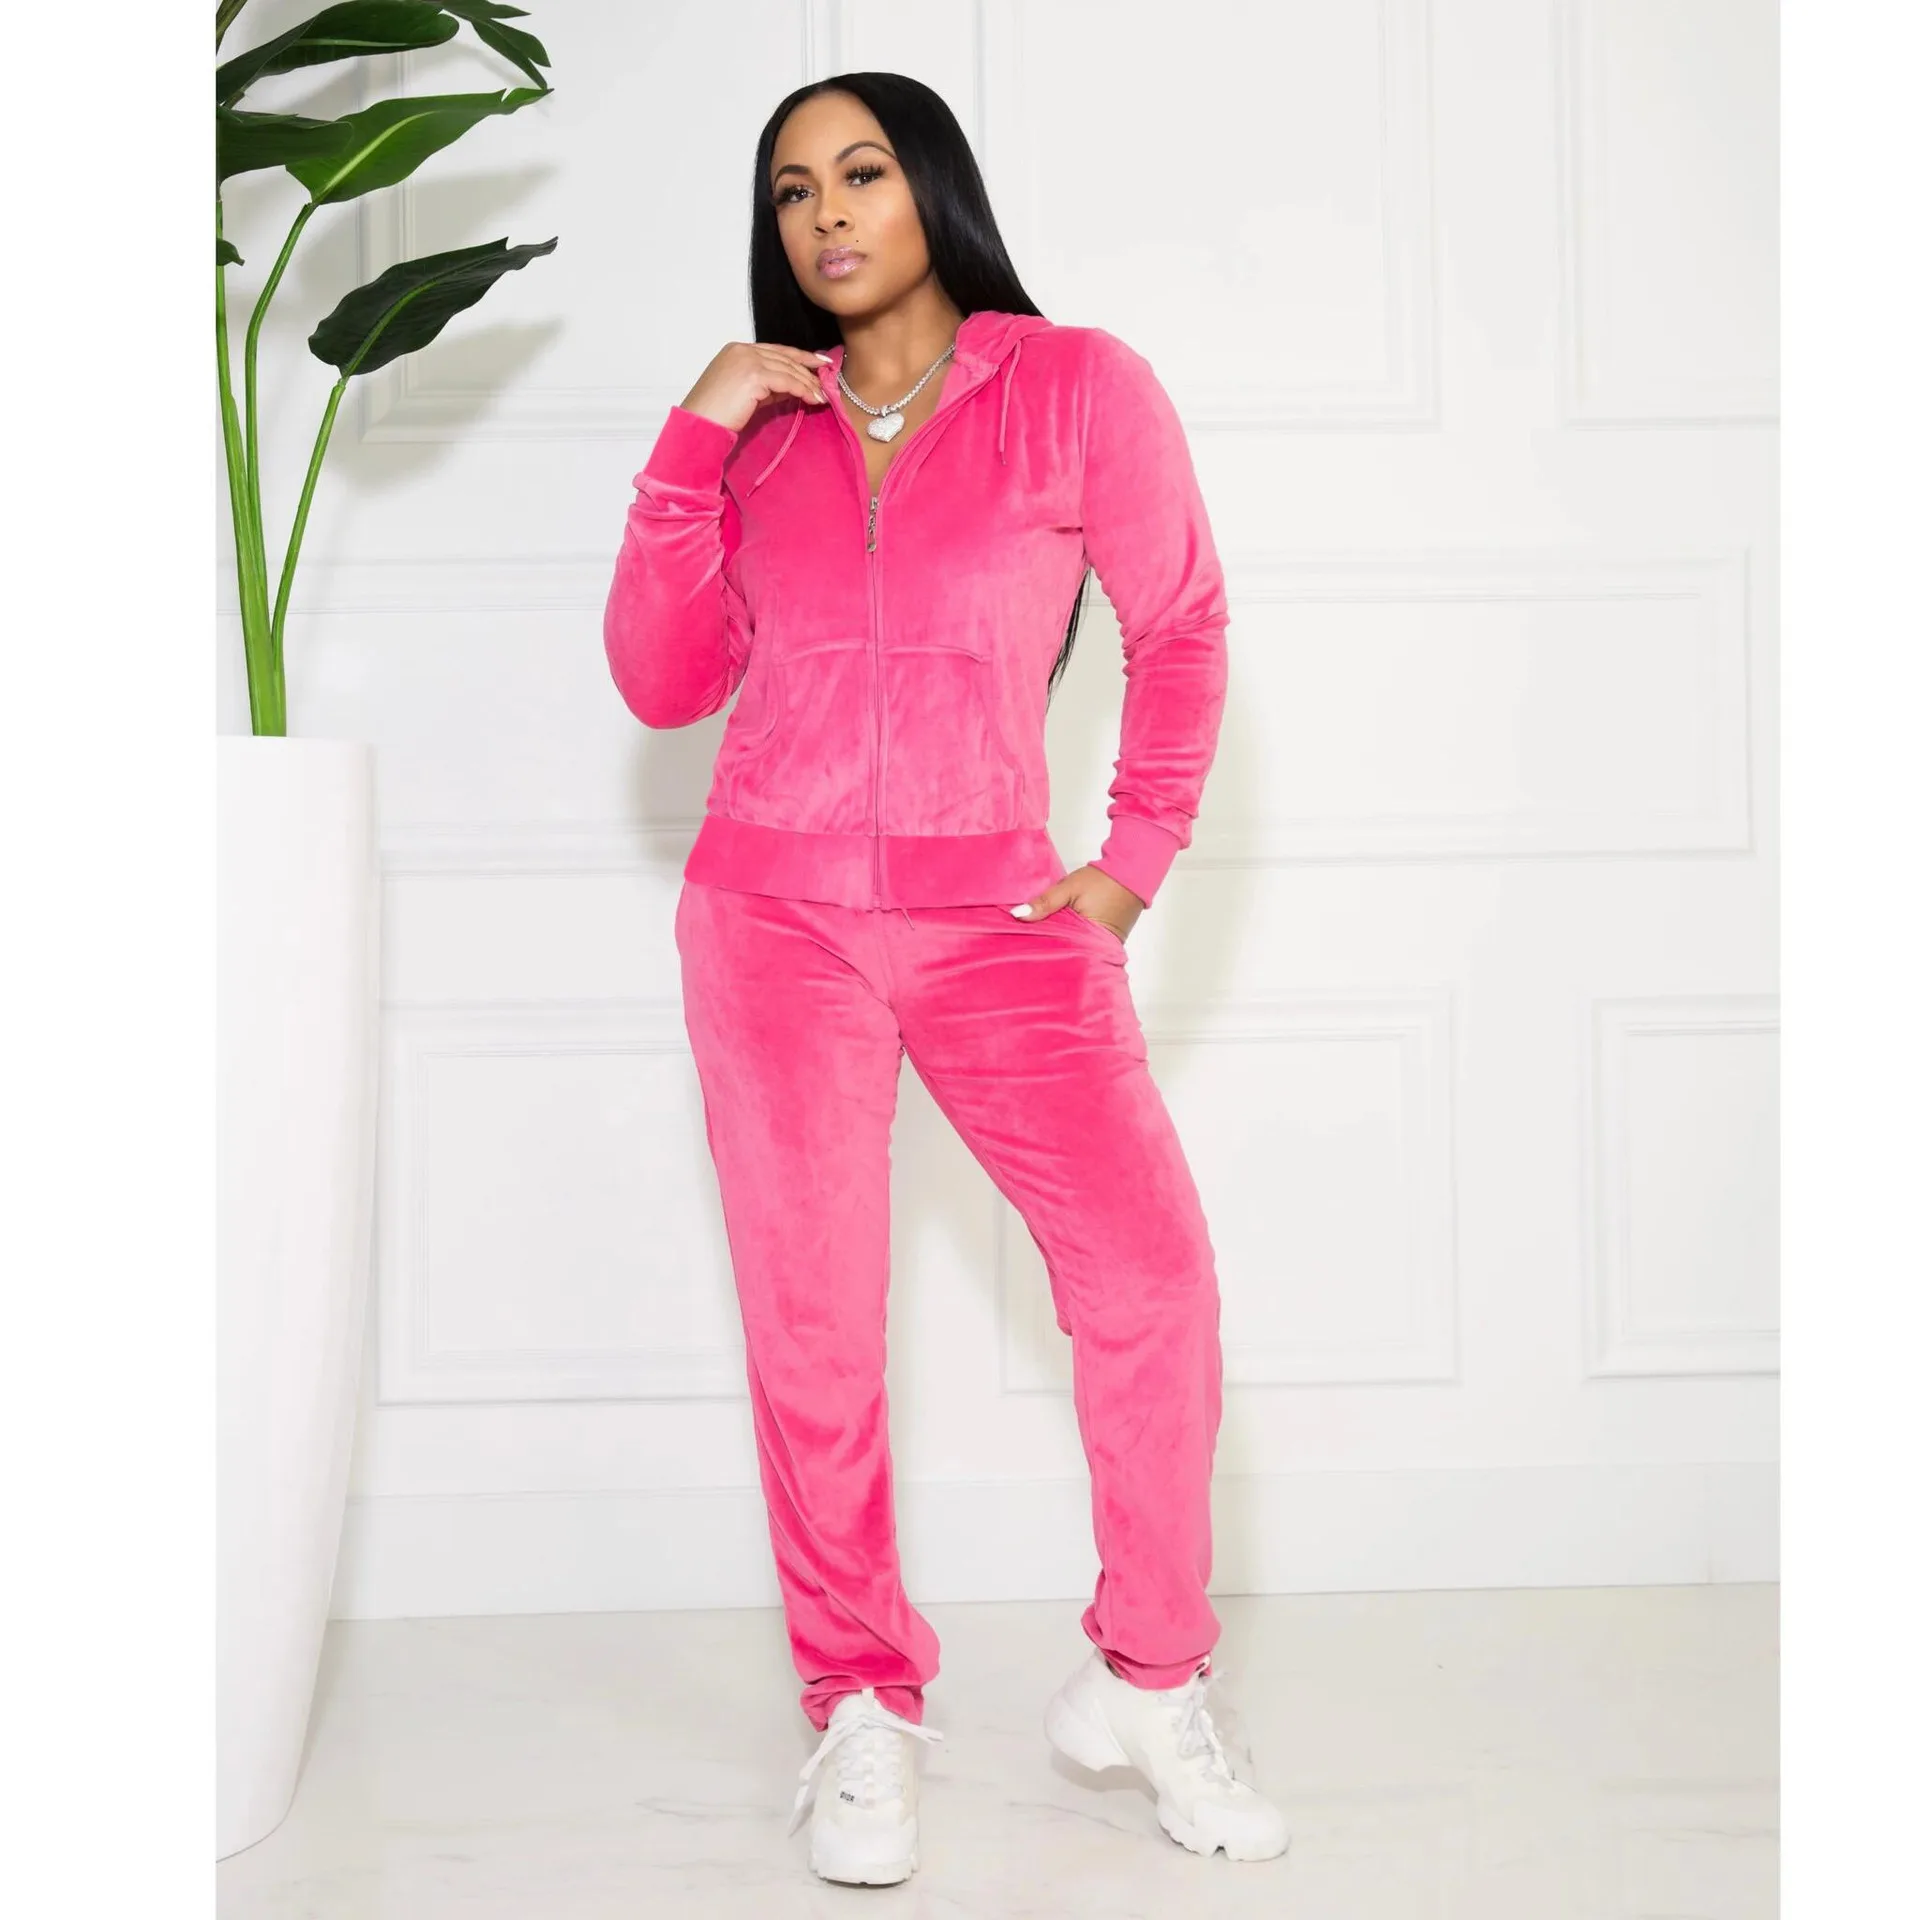 Winter/Fall 2021 Women's Brand Velvet Fabric Tracksuits Velour Suit Women Track Suit Hoodies And Pants Sportswear Outfits